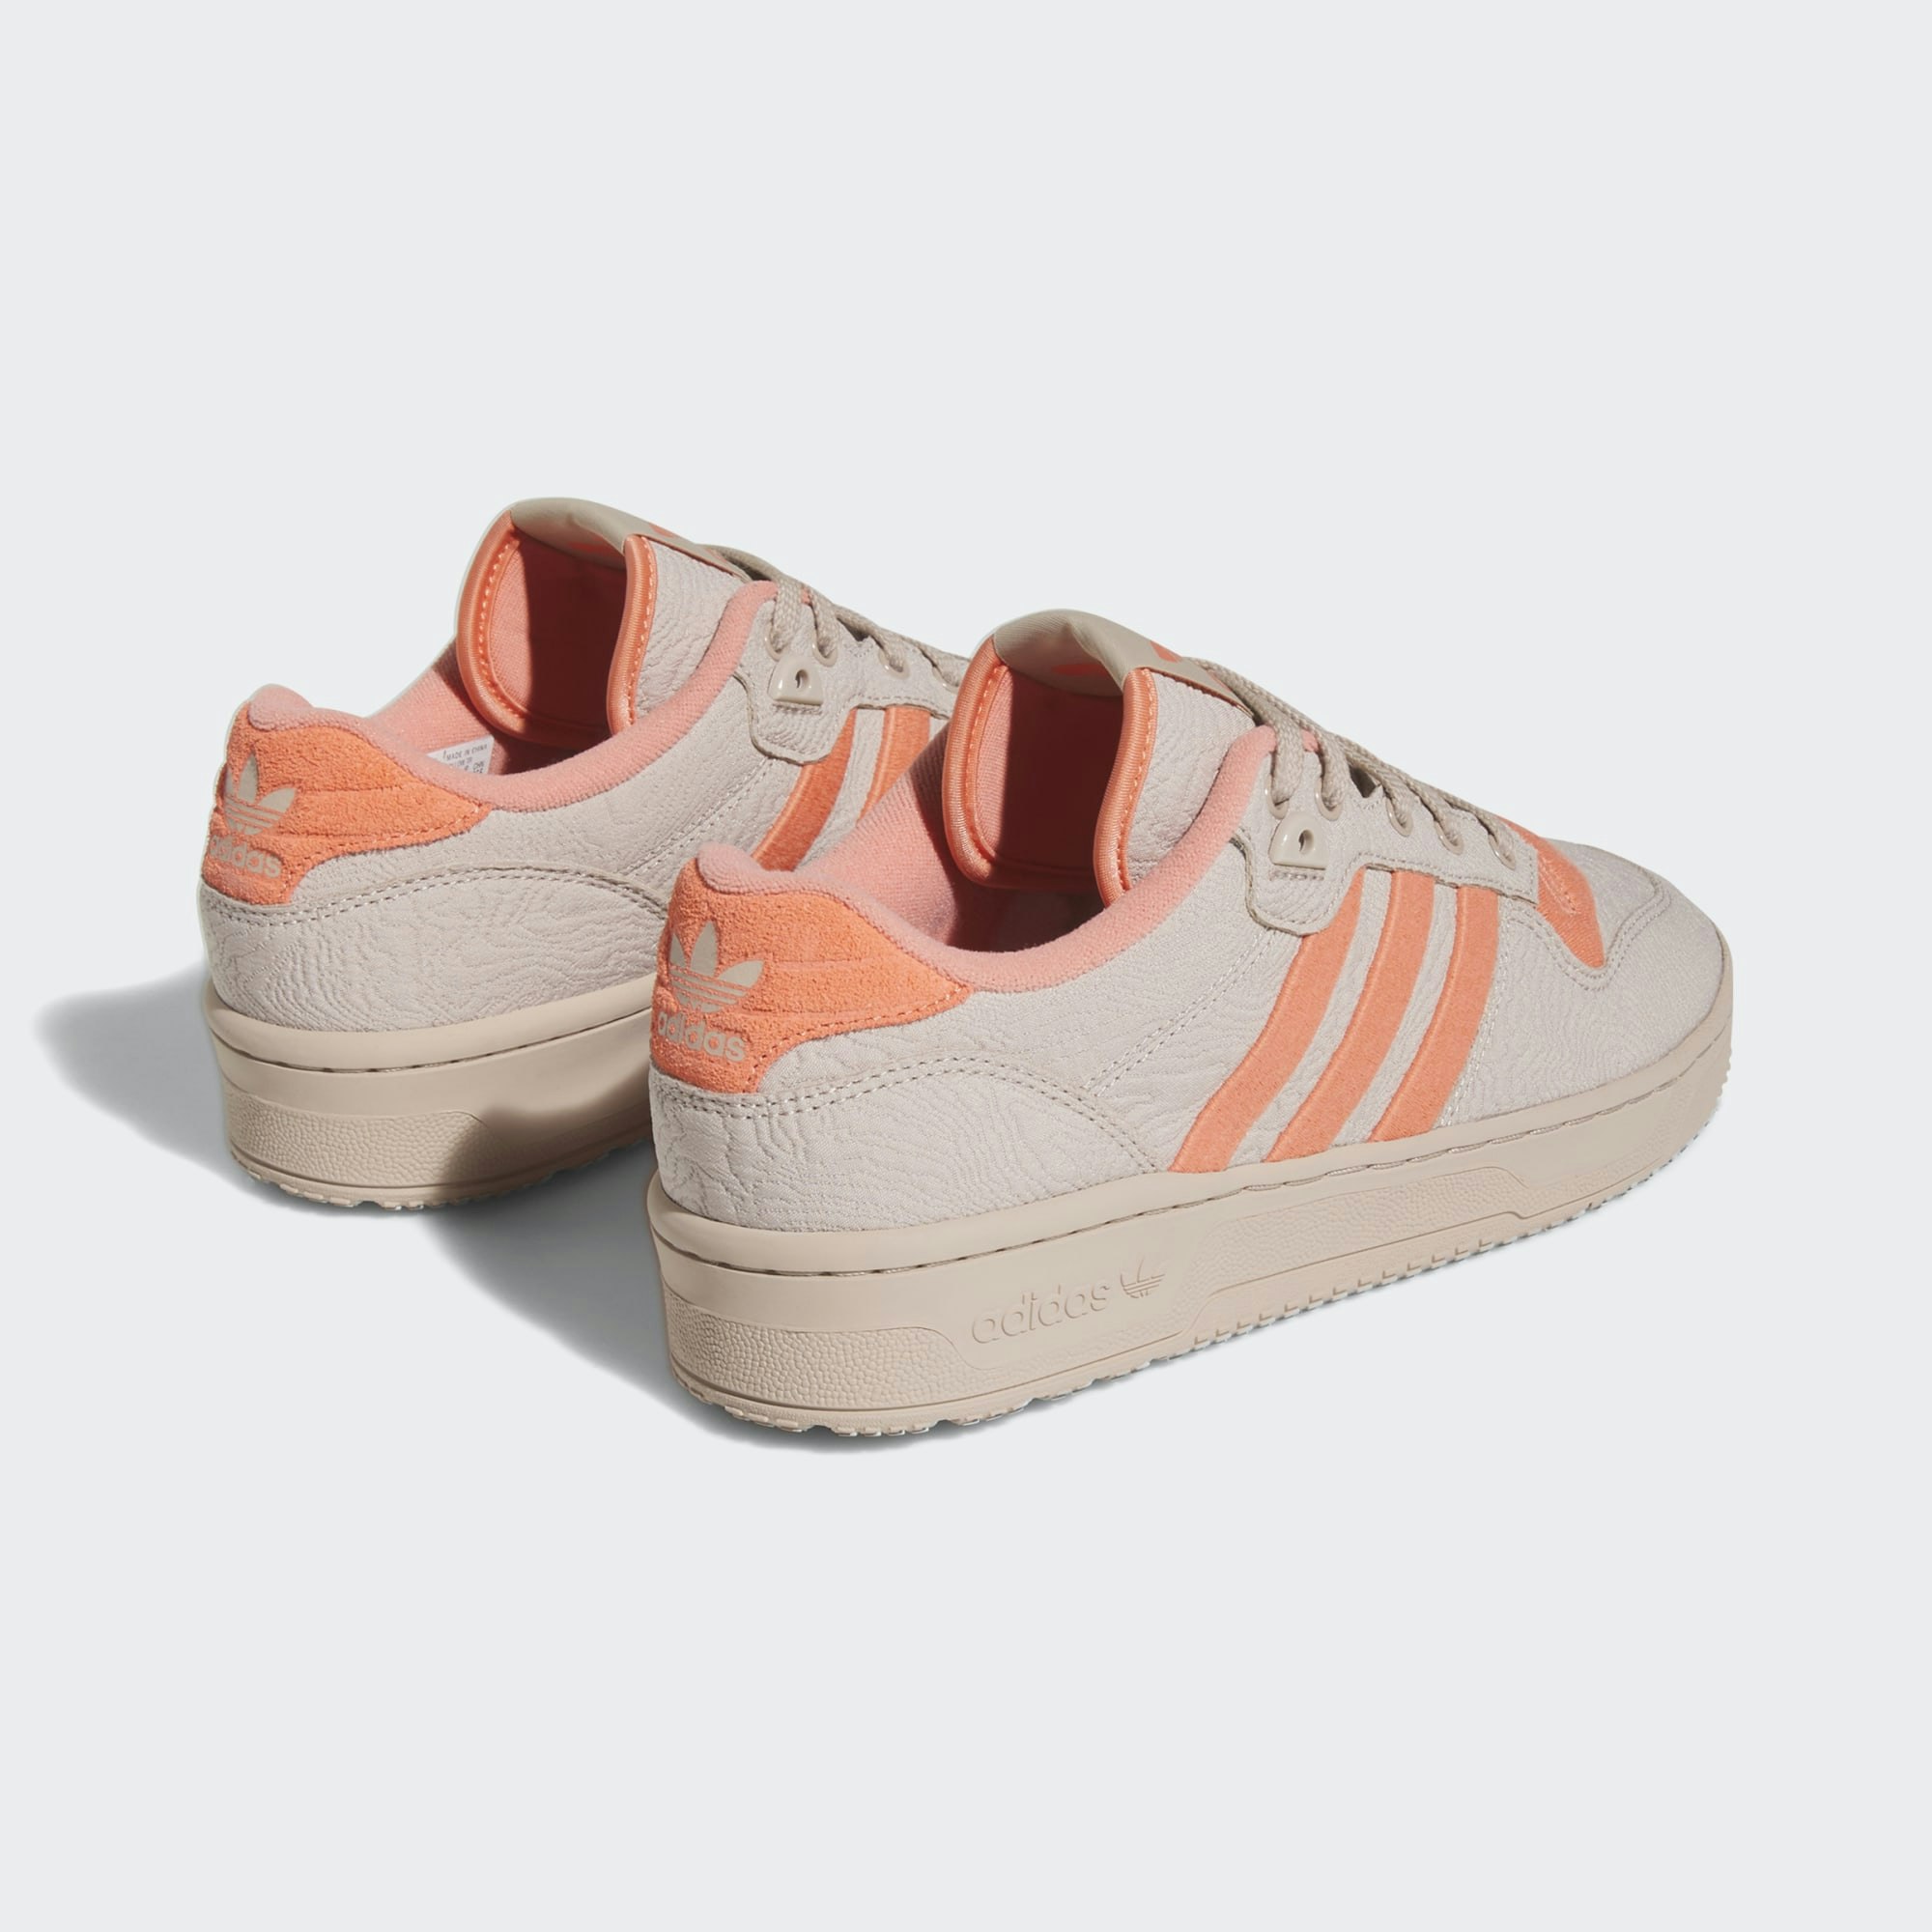 adidas Rivalry Low "Wonder Taupe"